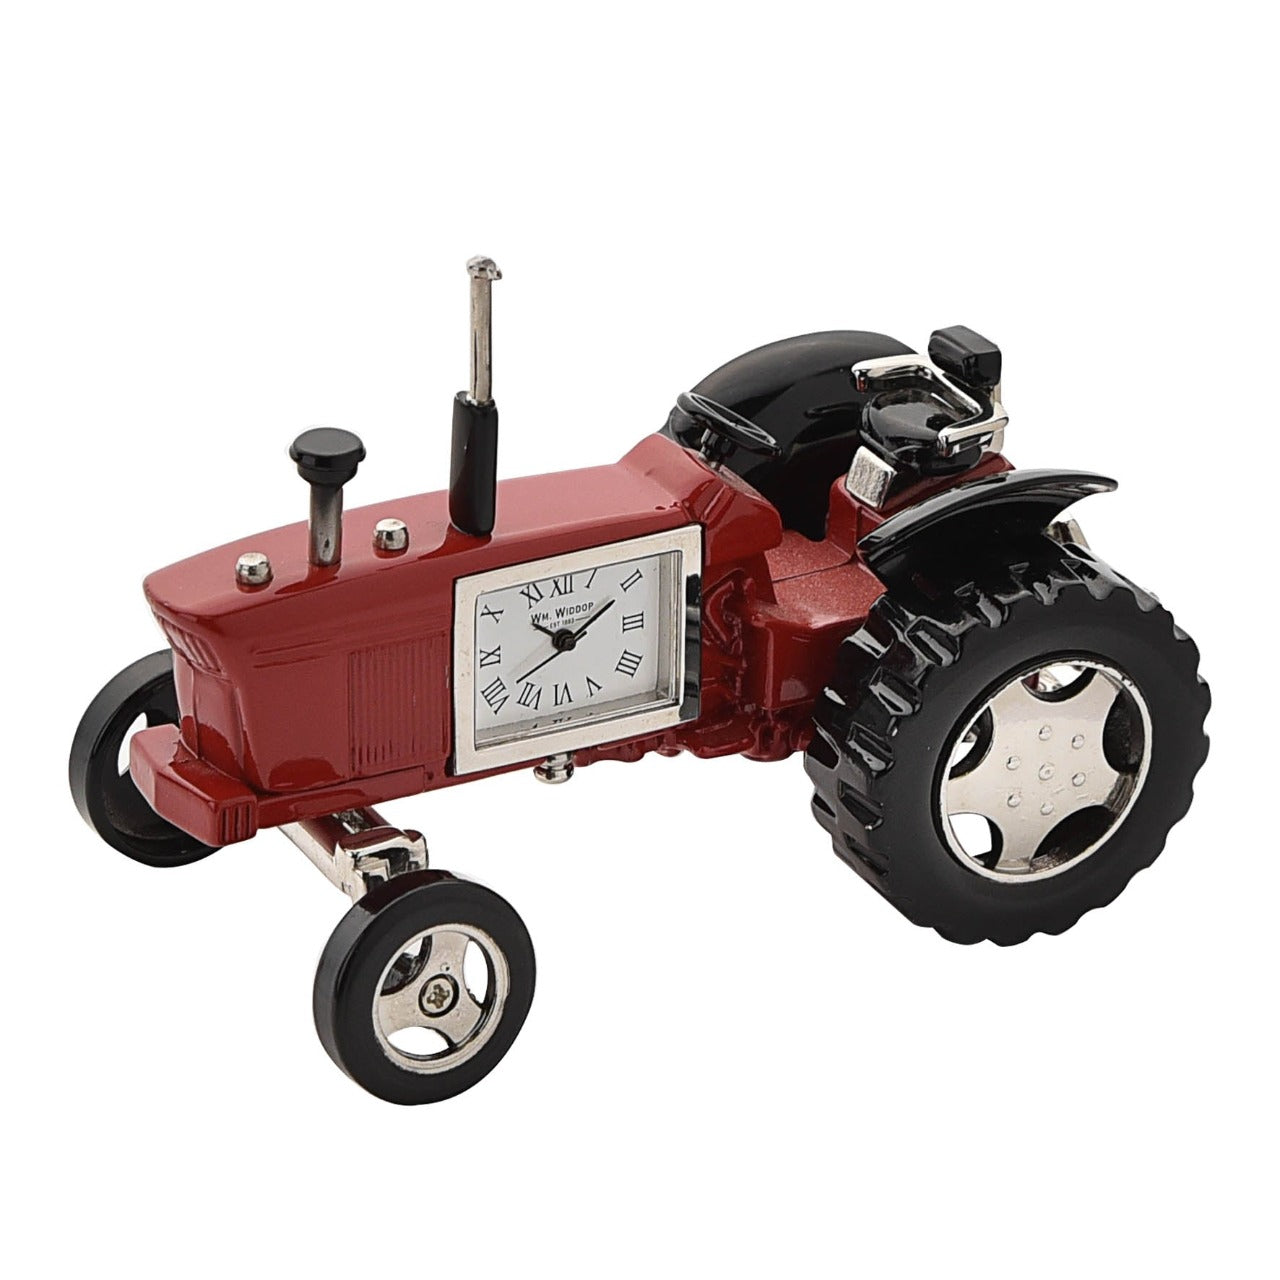 Miniature Clock Farmers Red Tractor by William Widdop  Bring a unique and quirky touch to the home with this stylish miniature clock made with great attention to detail.  The miniature tractor is a great gift for someone who has an interest in the farming world.